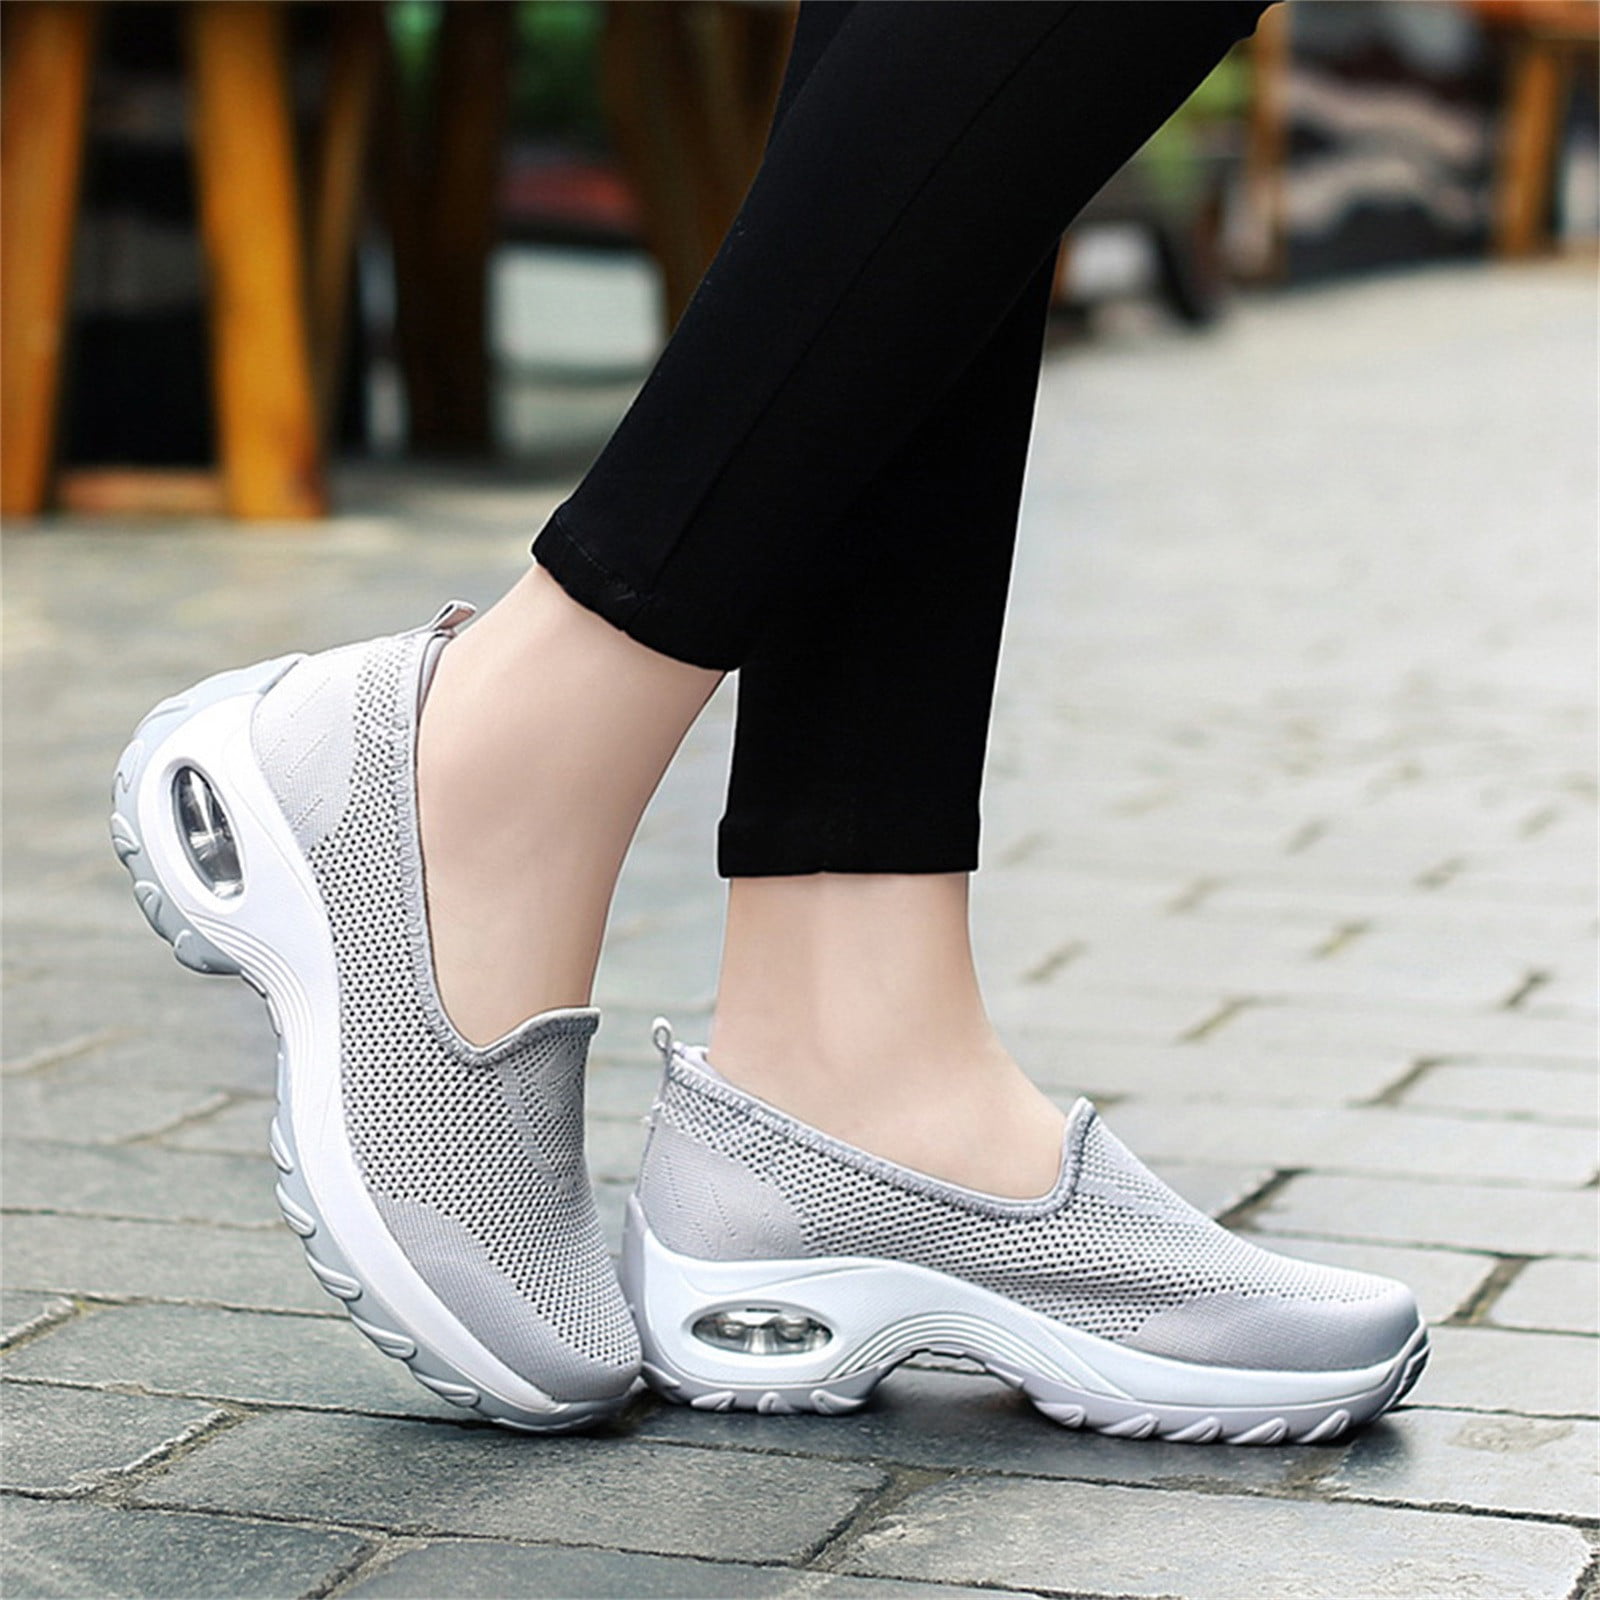 Women Sneakers Summer Casual Light Training Shoes Breathable Hand-Woven Sandals Water Shoes Lazy Shoes 